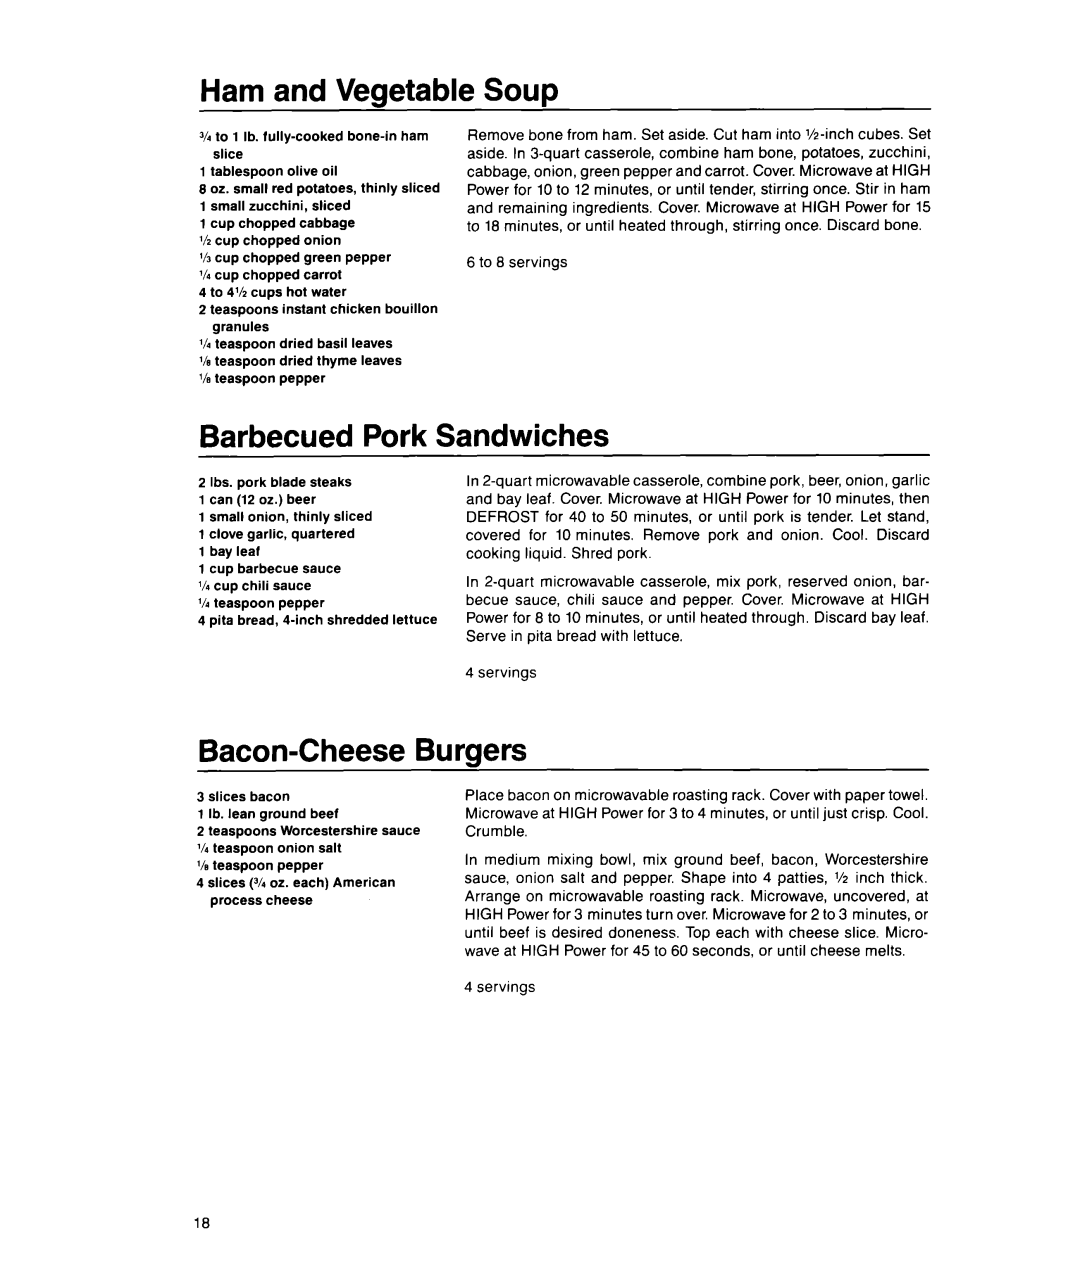 Whirlpool MS1600XW manual Ham and Vegetable Soup, Pork, Bacon-CheeseBurgers, Barbecued, Sandwiches 